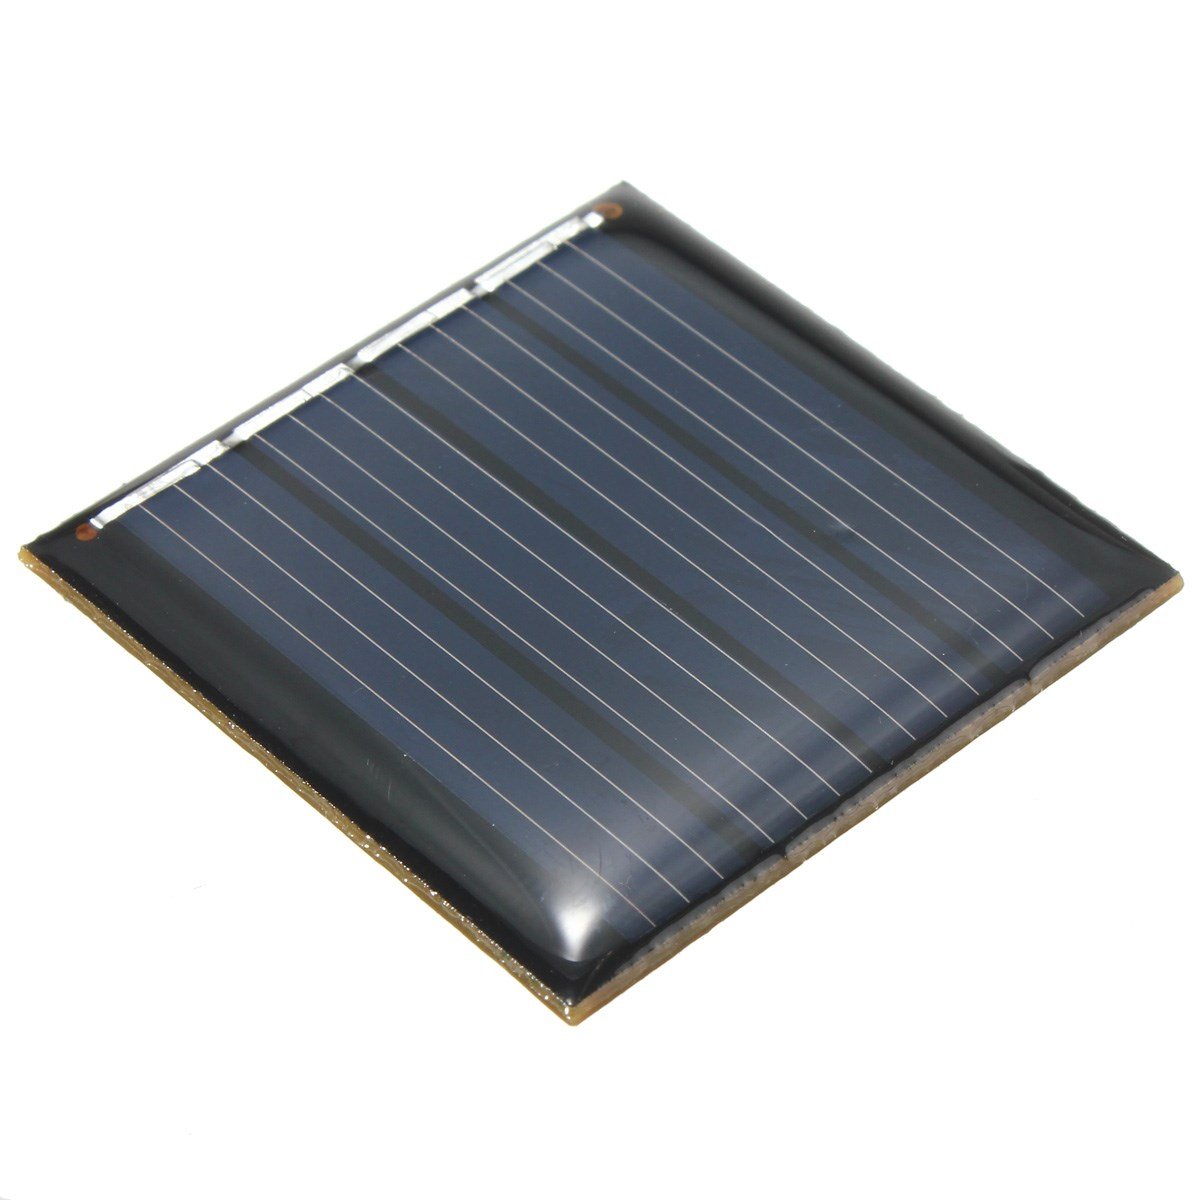 2V 0.14W Epoxy Battery Plate Polycrystalline Silicon Cell Batteries DIY Solar Powered Panels Solar Panel Cell Model 40 x 40x3mm 1